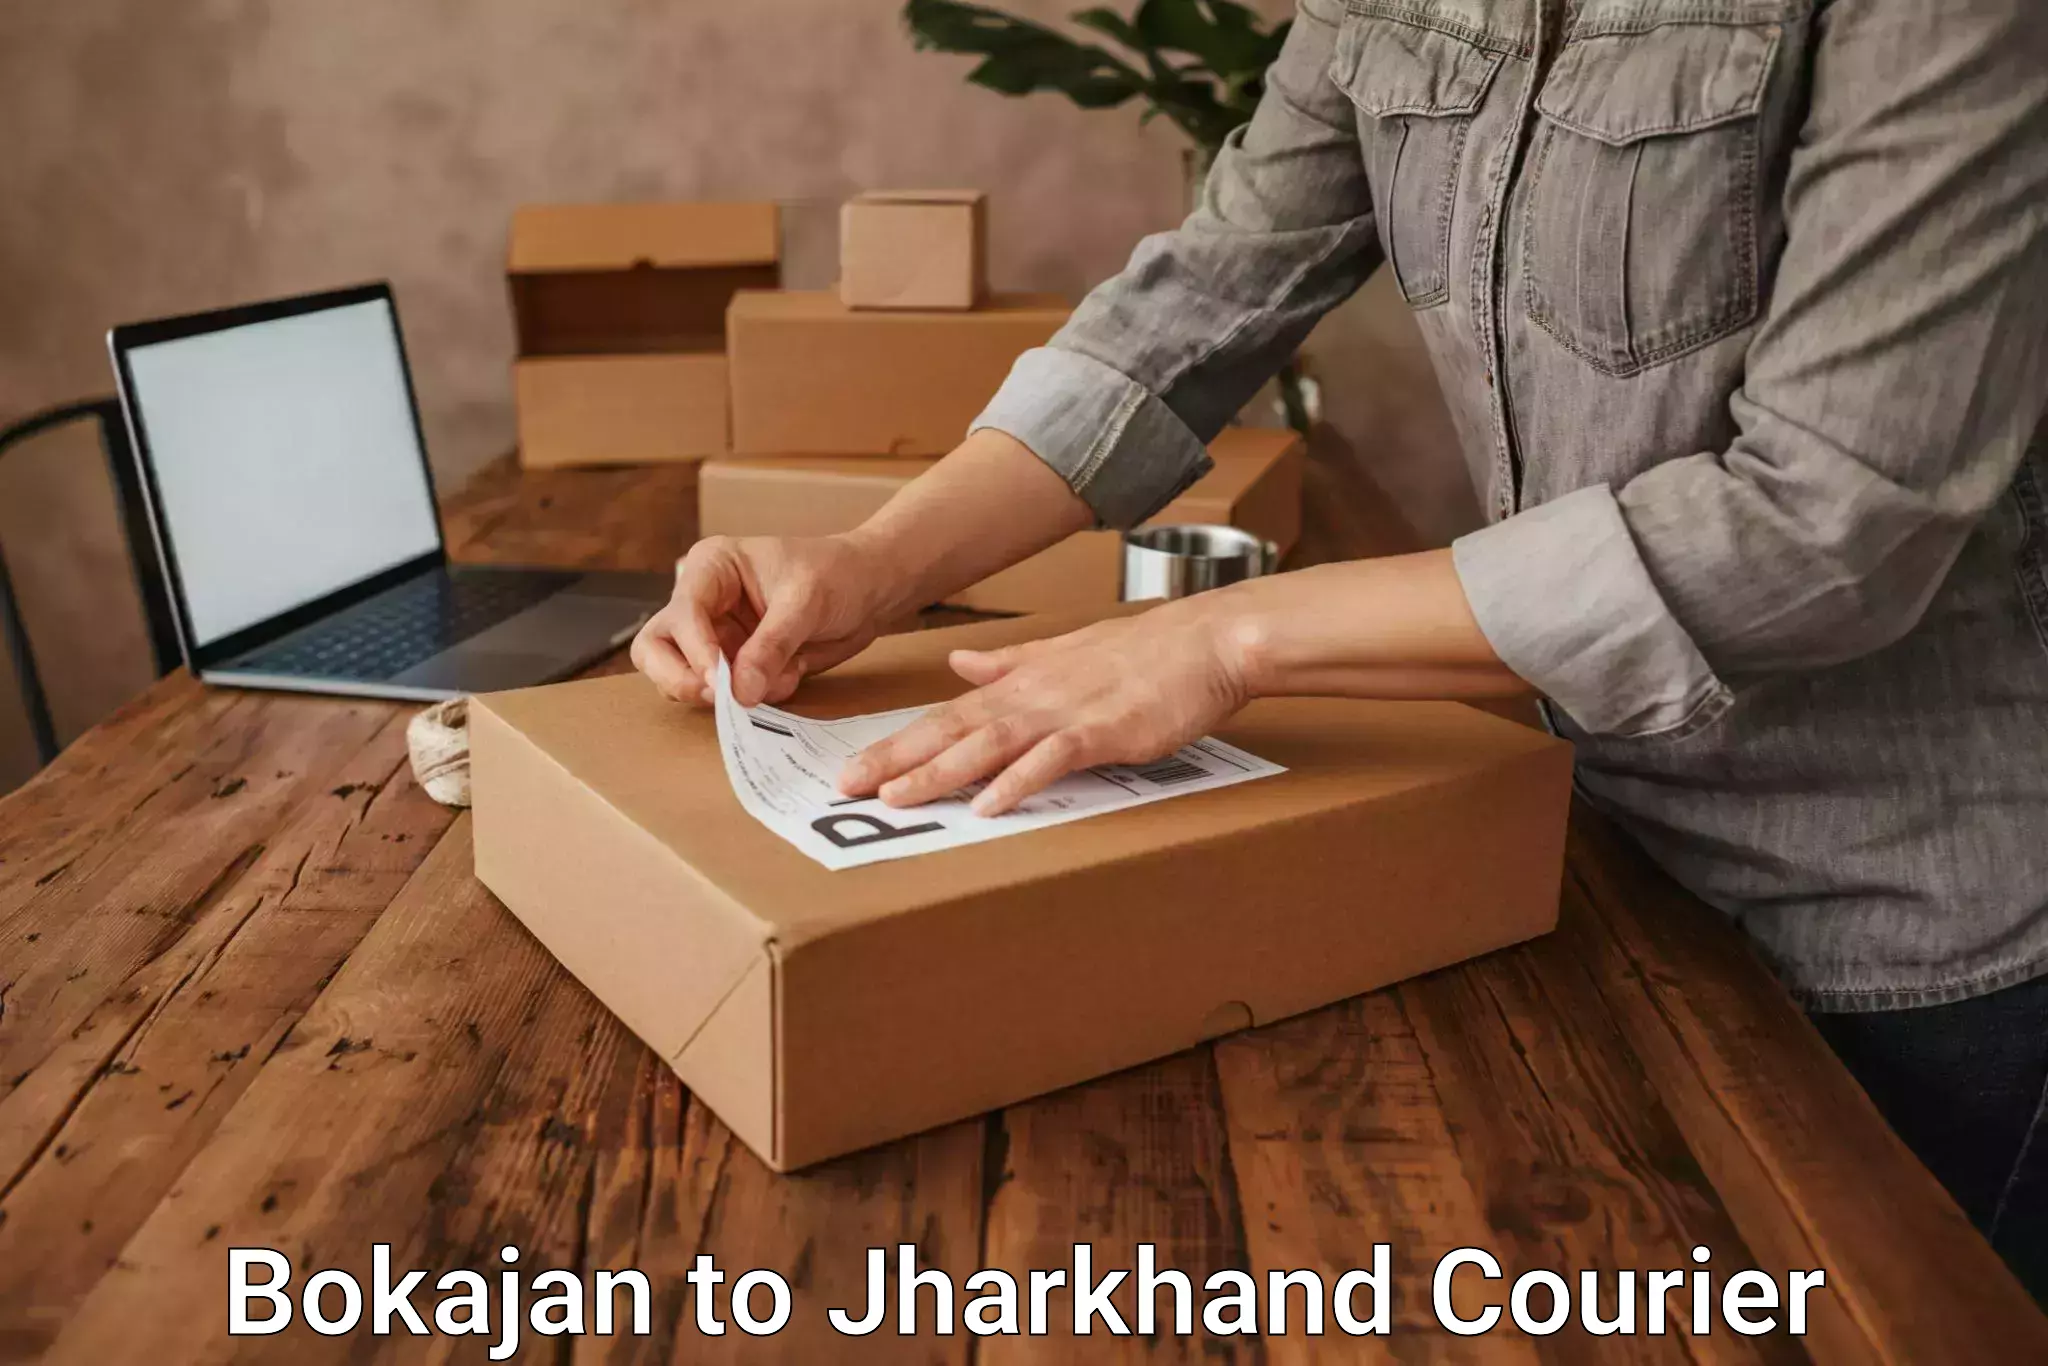 Automated parcel services Bokajan to Jharkhand